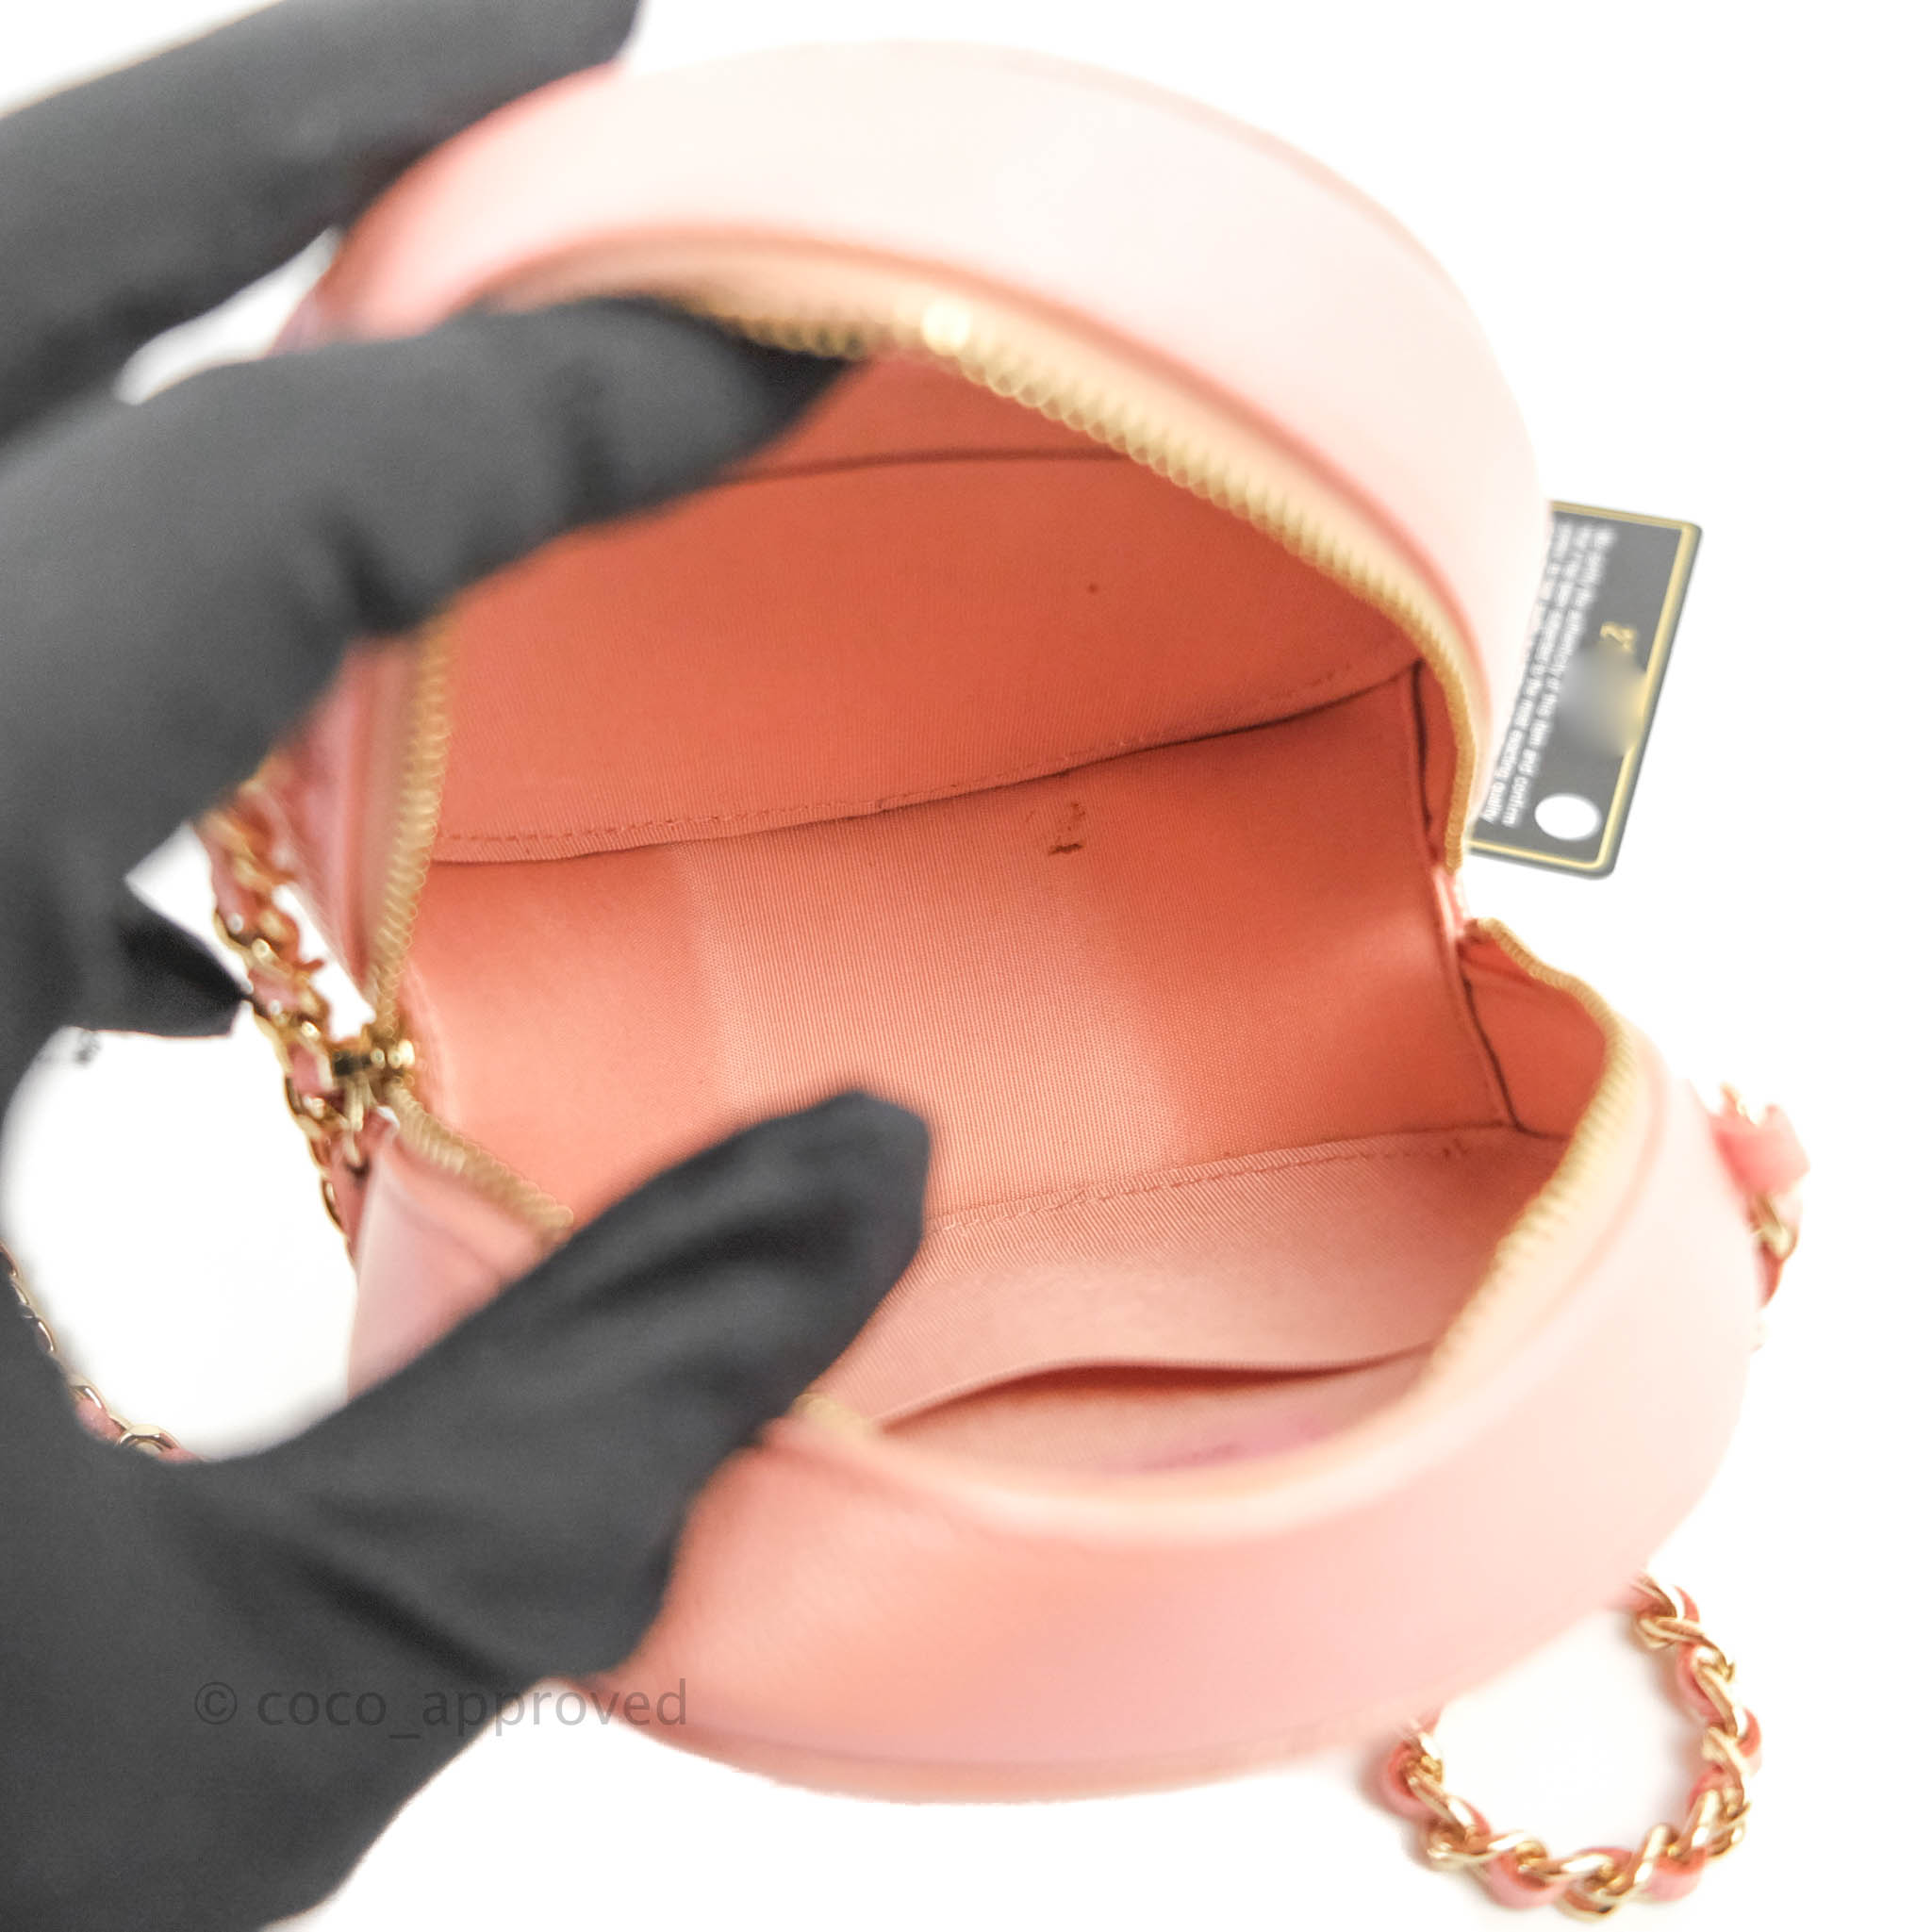 New- Amazing Chanel Round On Earth shoulder bag in Pink quilted